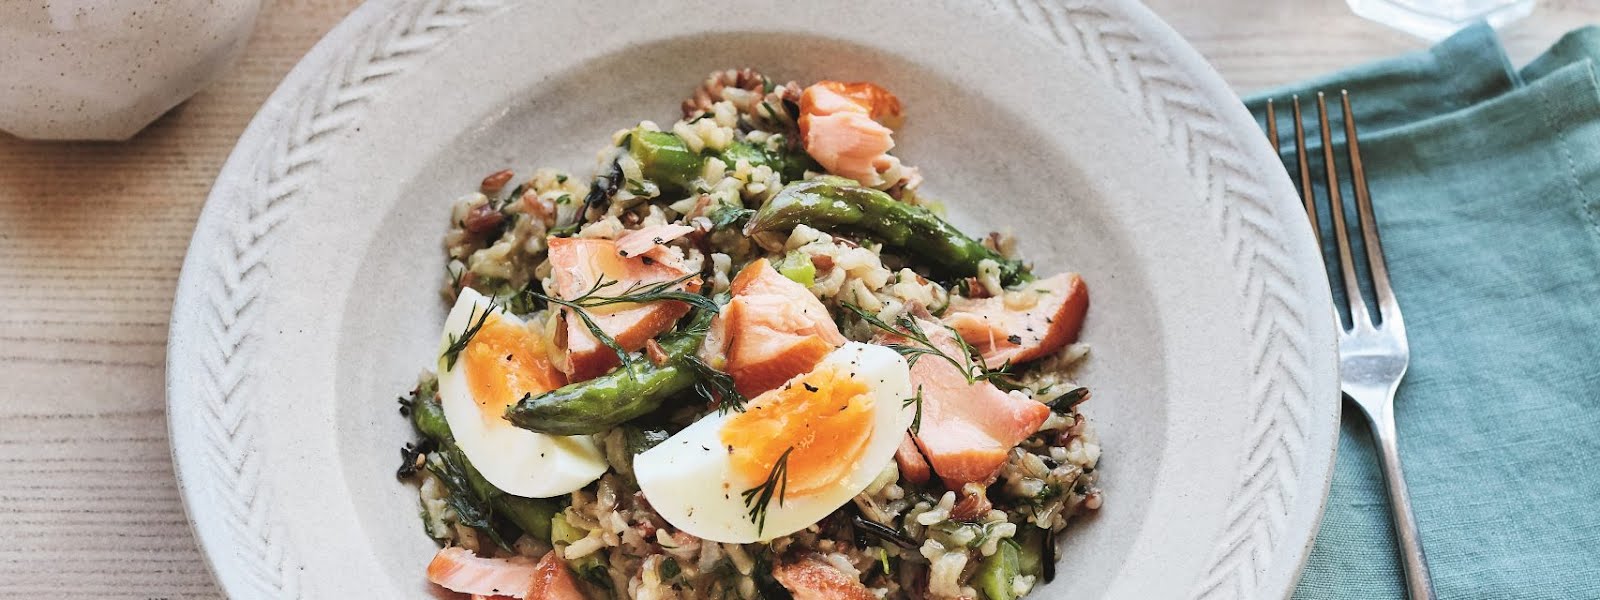 Supper Club: Hot-smoked salmon rice and asparagus salad